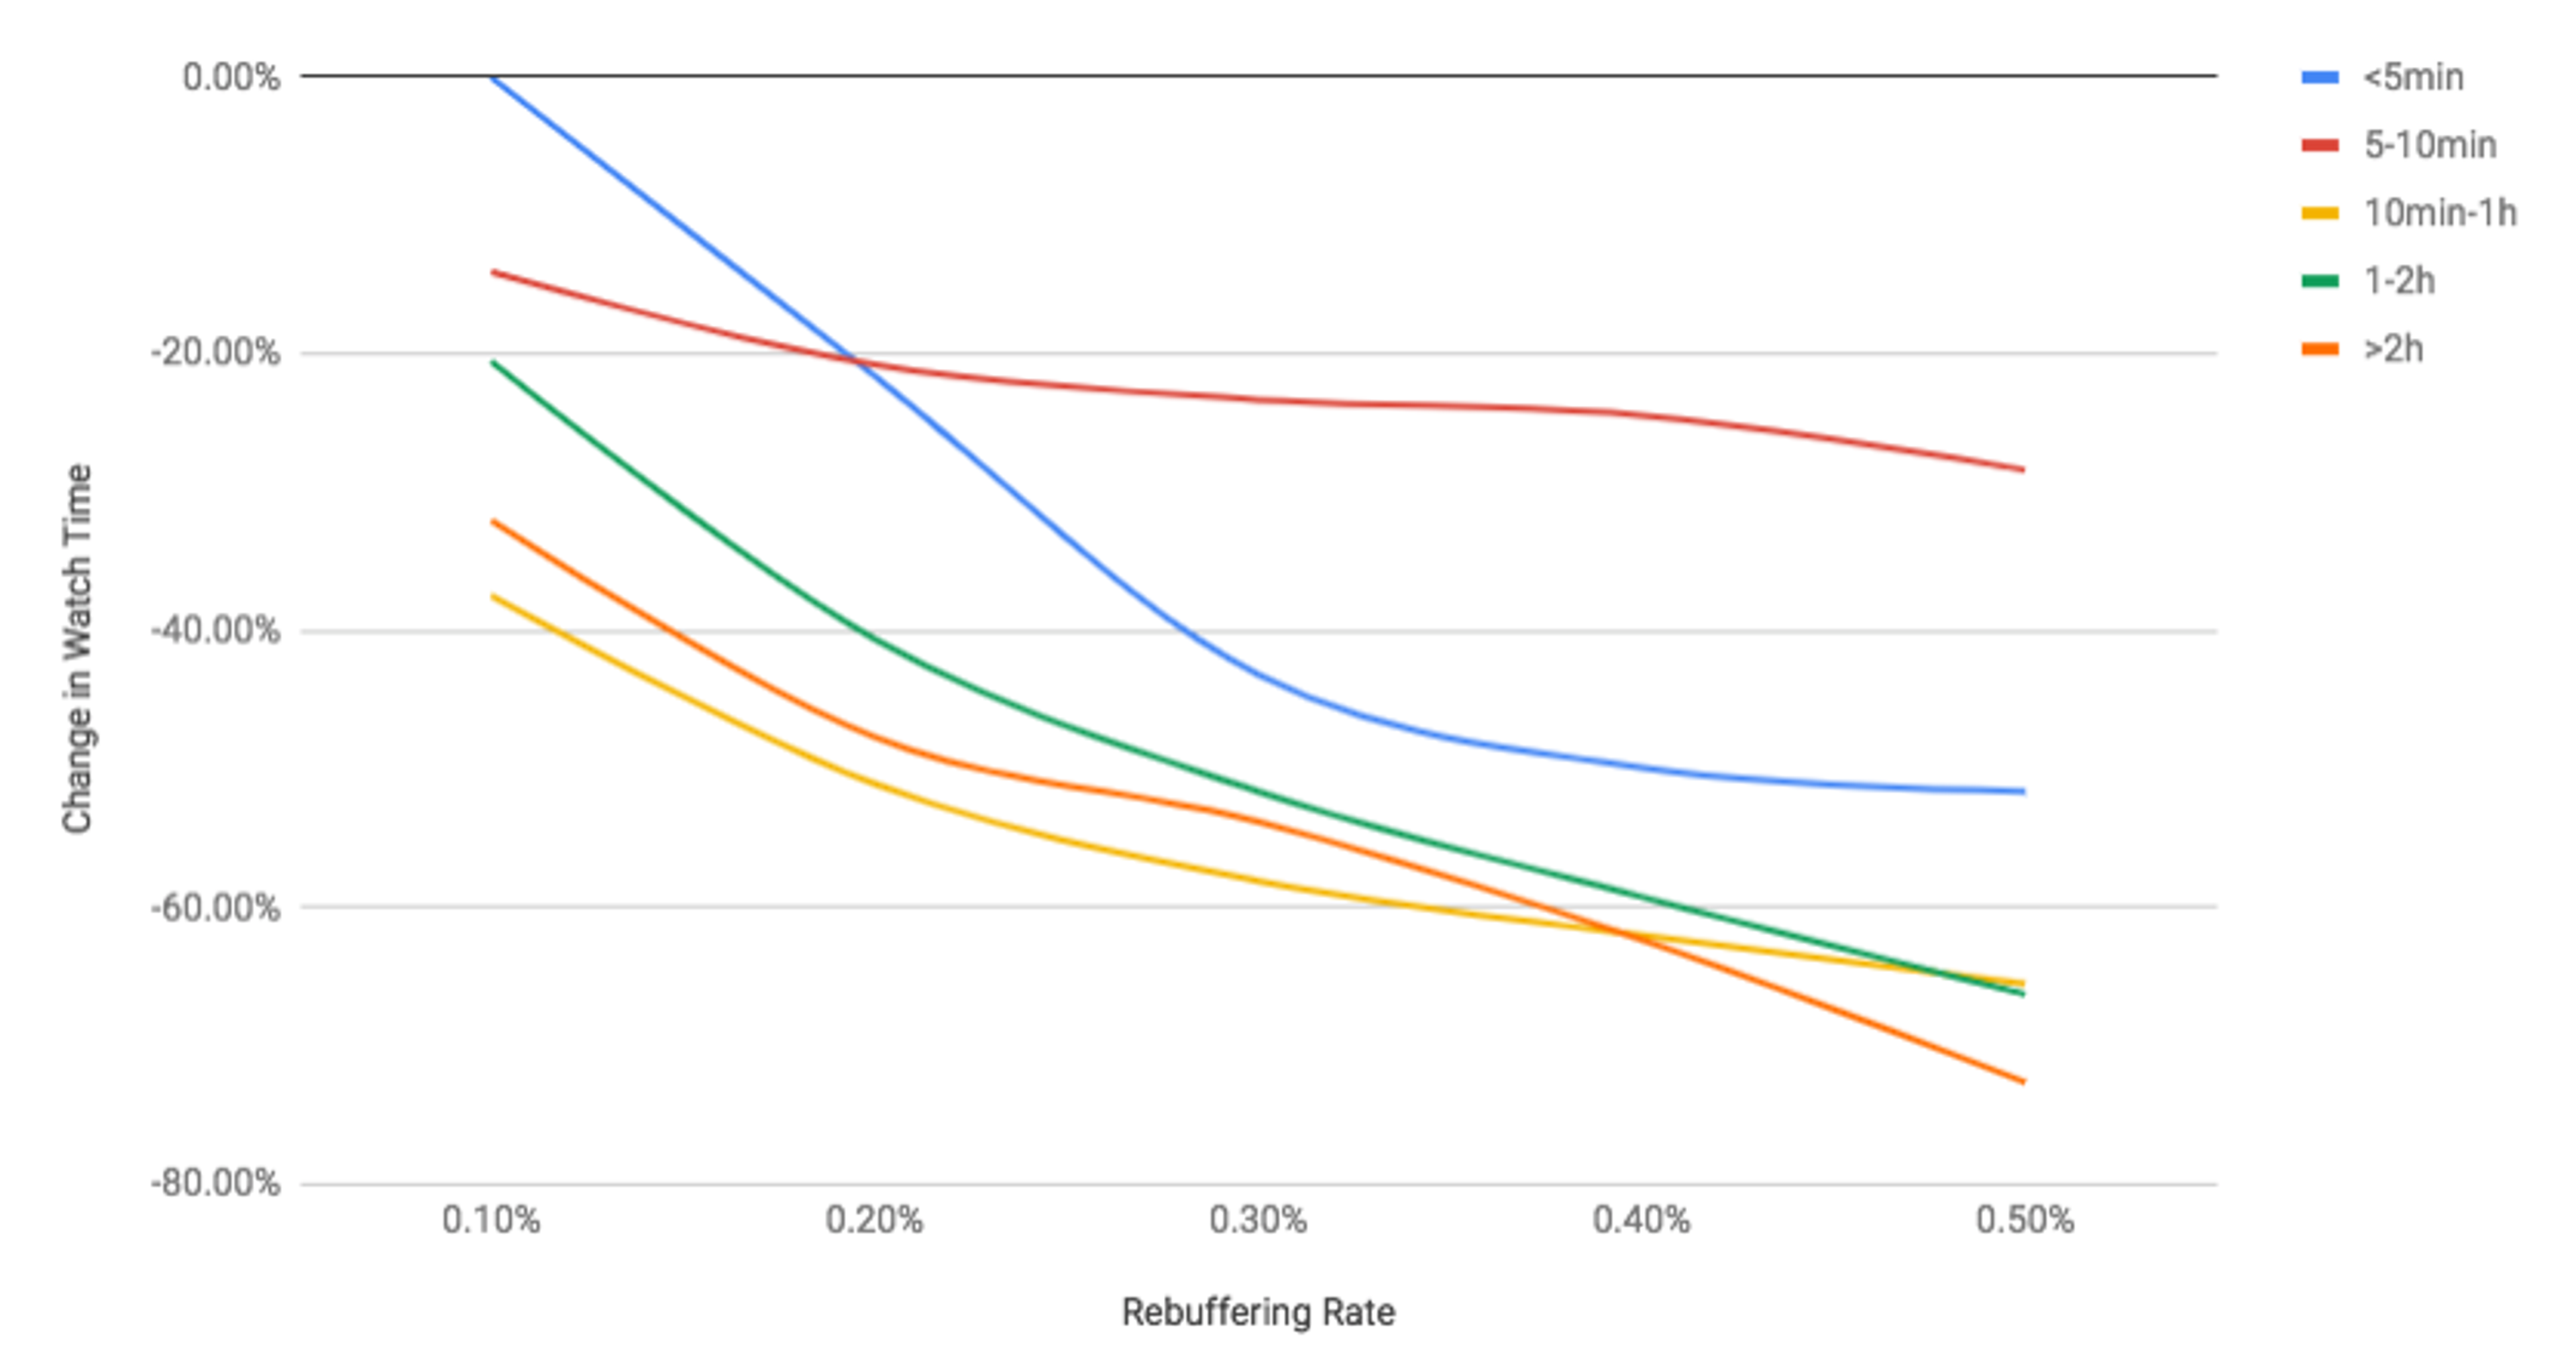 A graph showing rebuffering rates